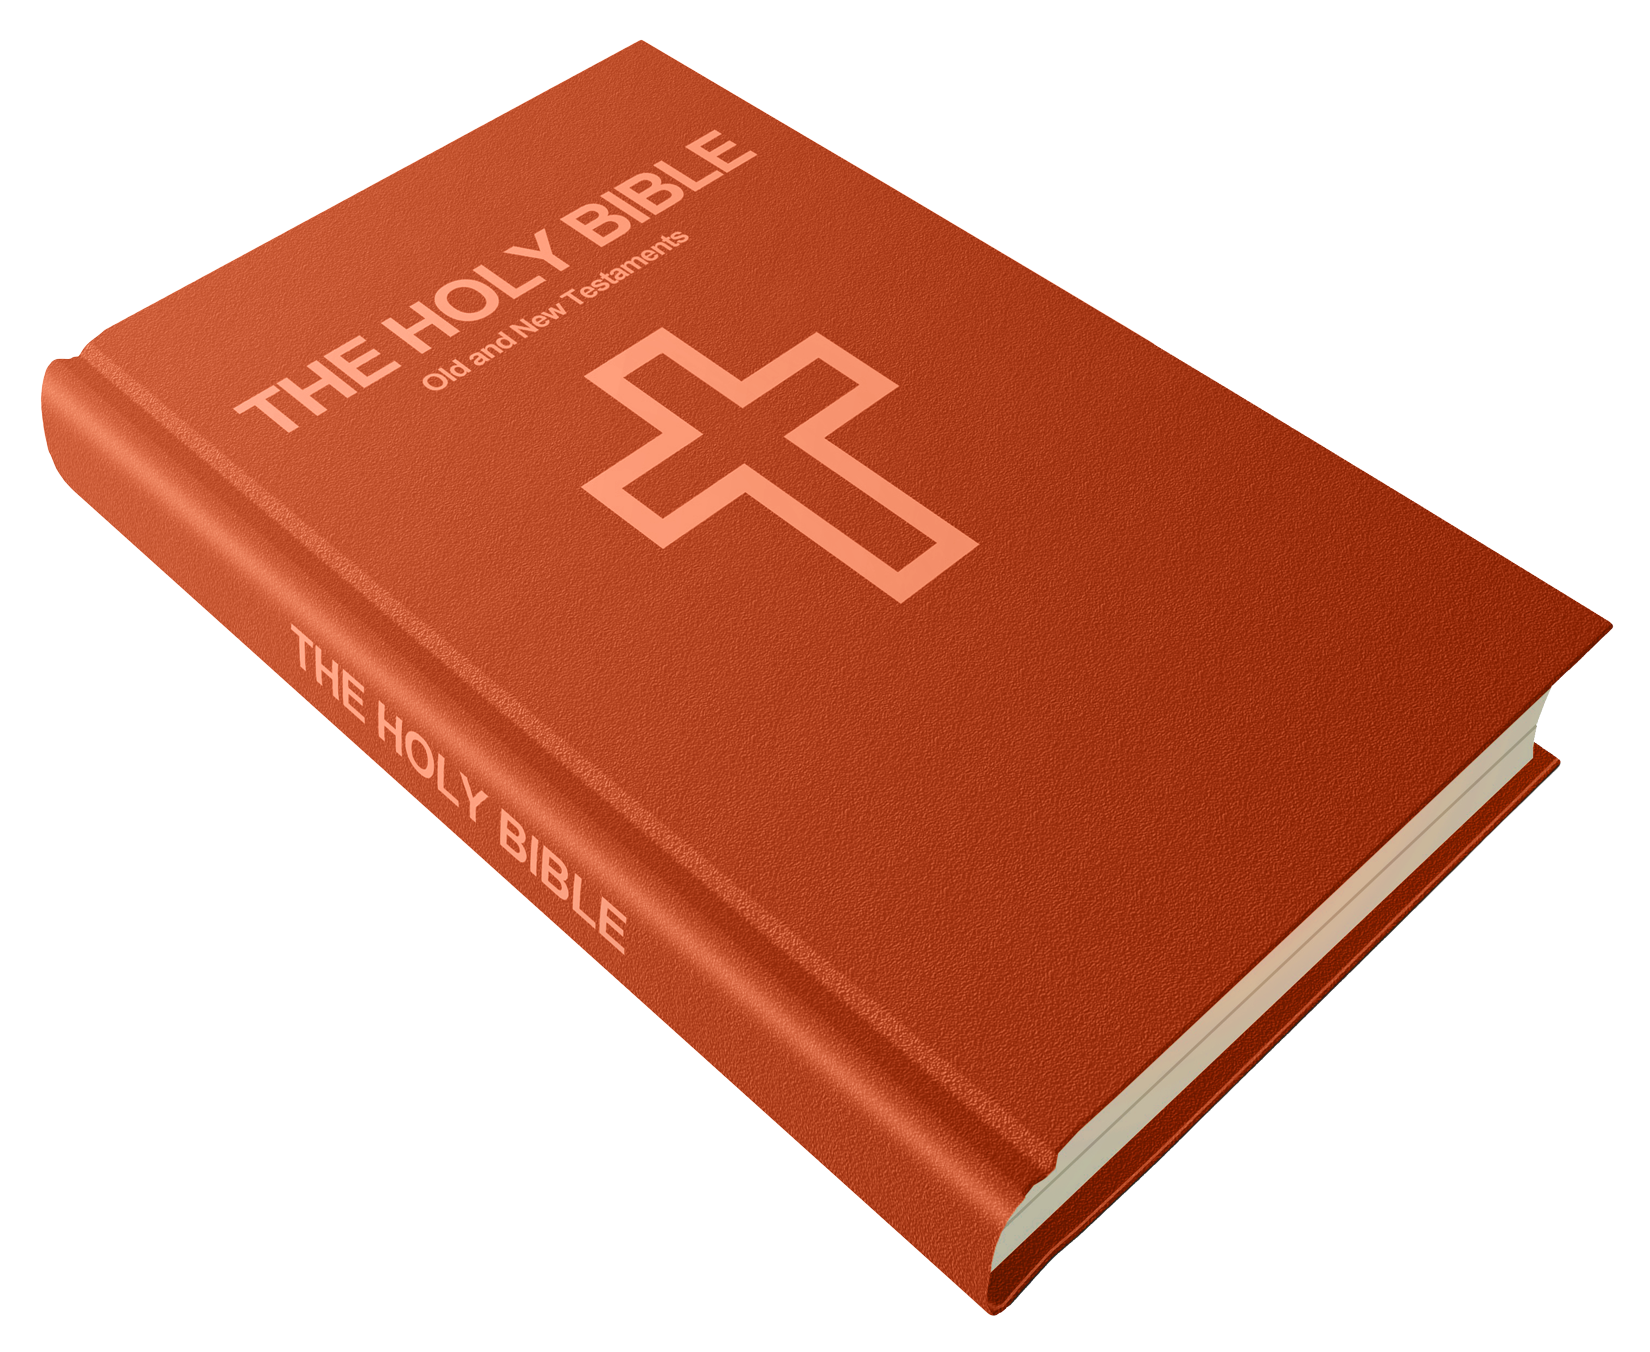 Holy Bible Book Cover PNG image